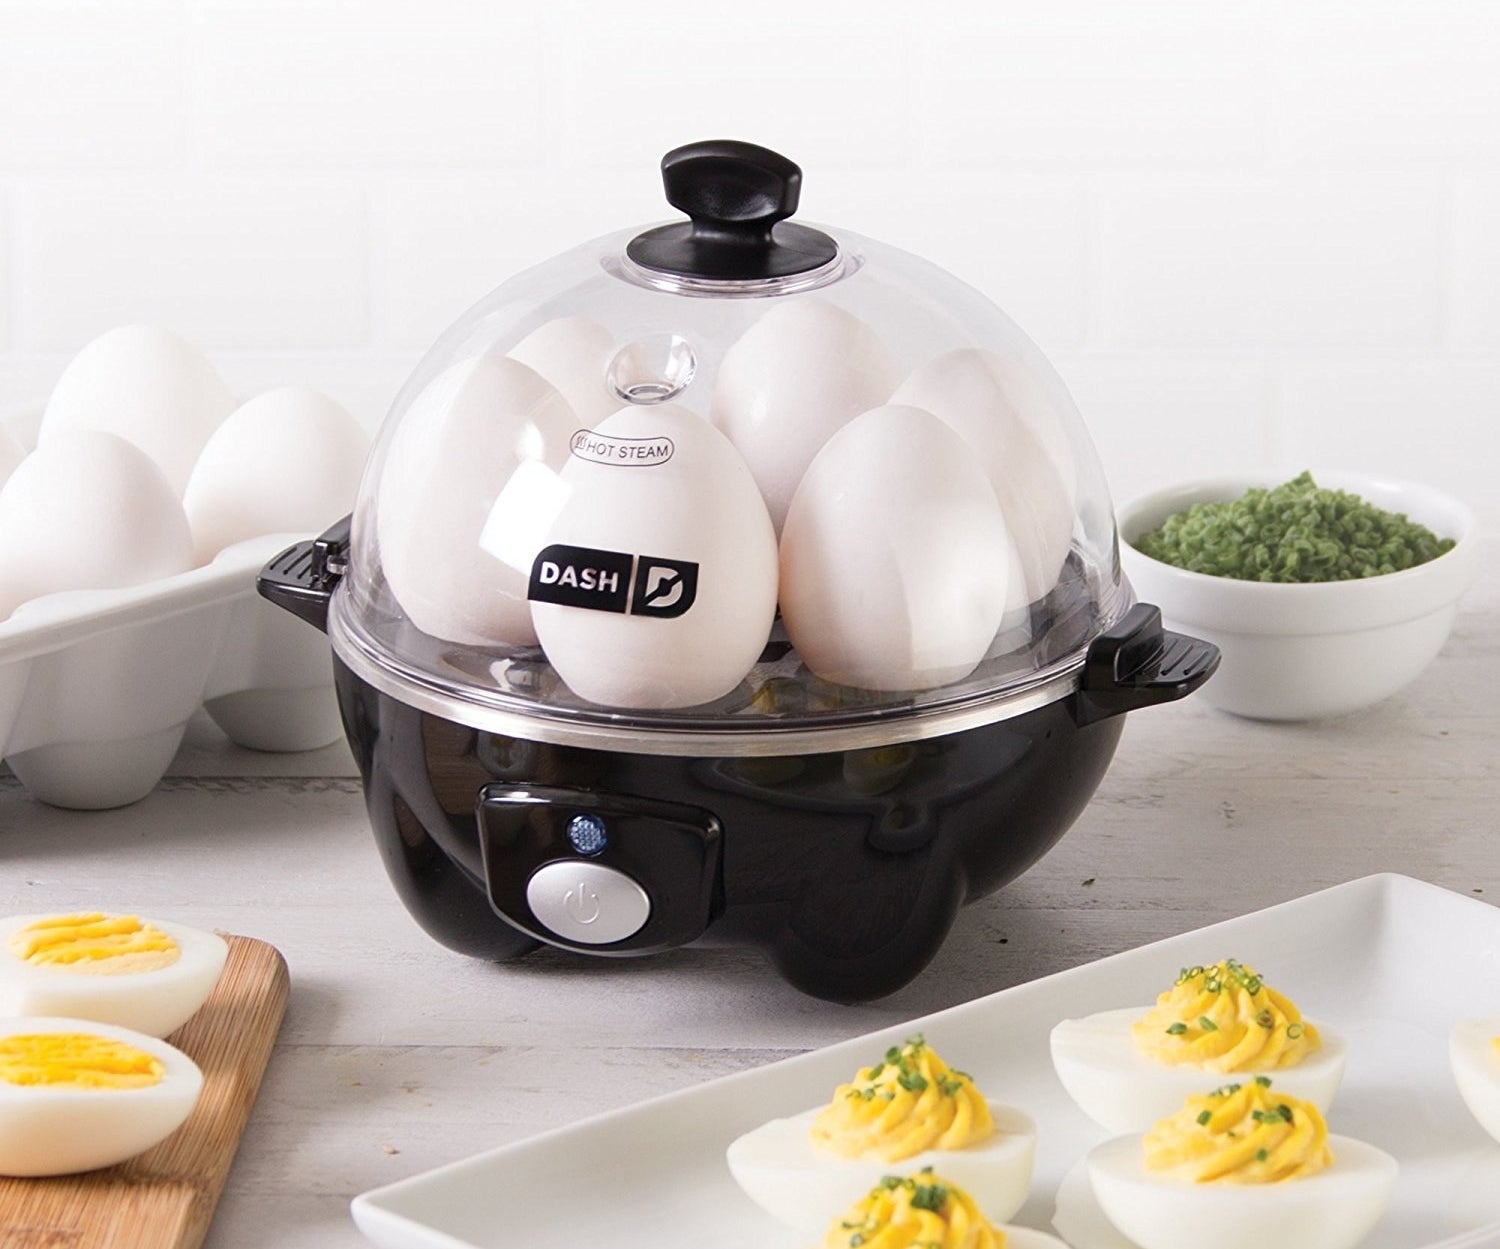 Poach, steam, or hard-boil up to 6 eggs in minutes w/ this $16 countertop  cooker